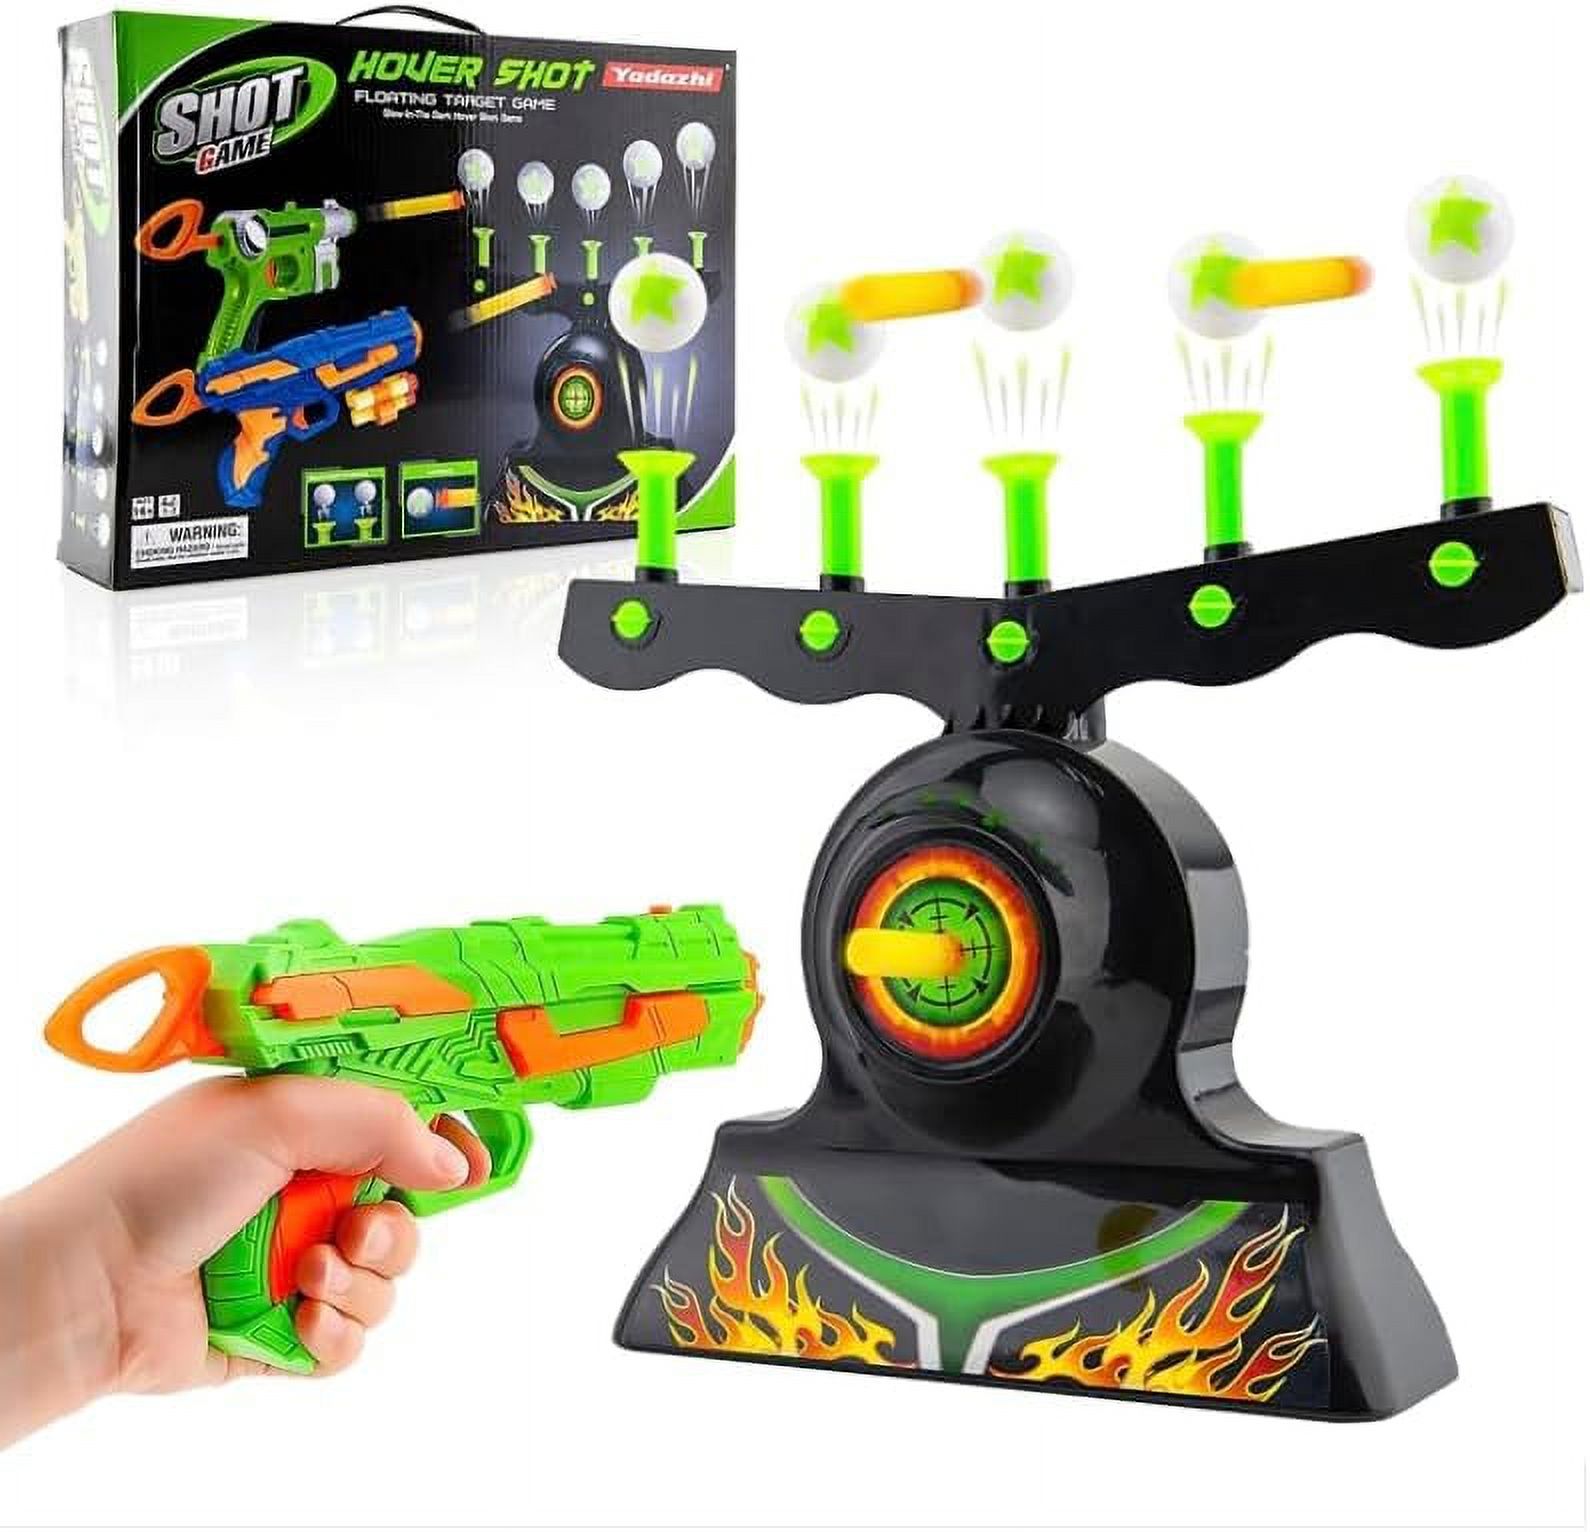 Unleash Your Shooting Skills with our Floating Target Practice Game Set - Perfect for Nerf Fans